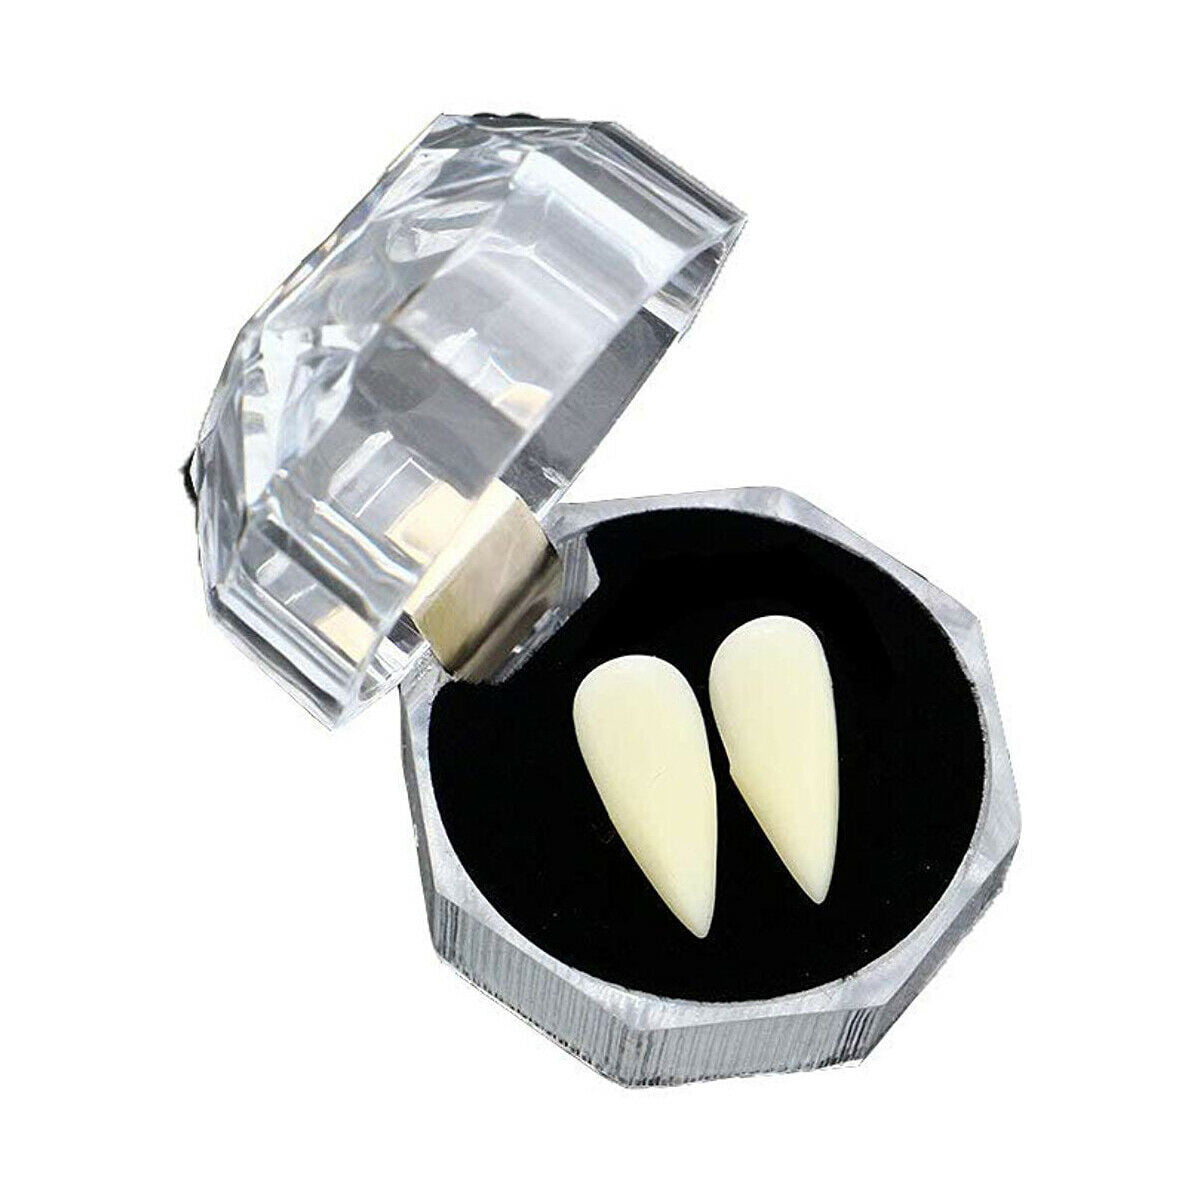 Halloween White Vampire Dracula Fangs Caps Teeth Fancy Dress With Putty Adhesive 